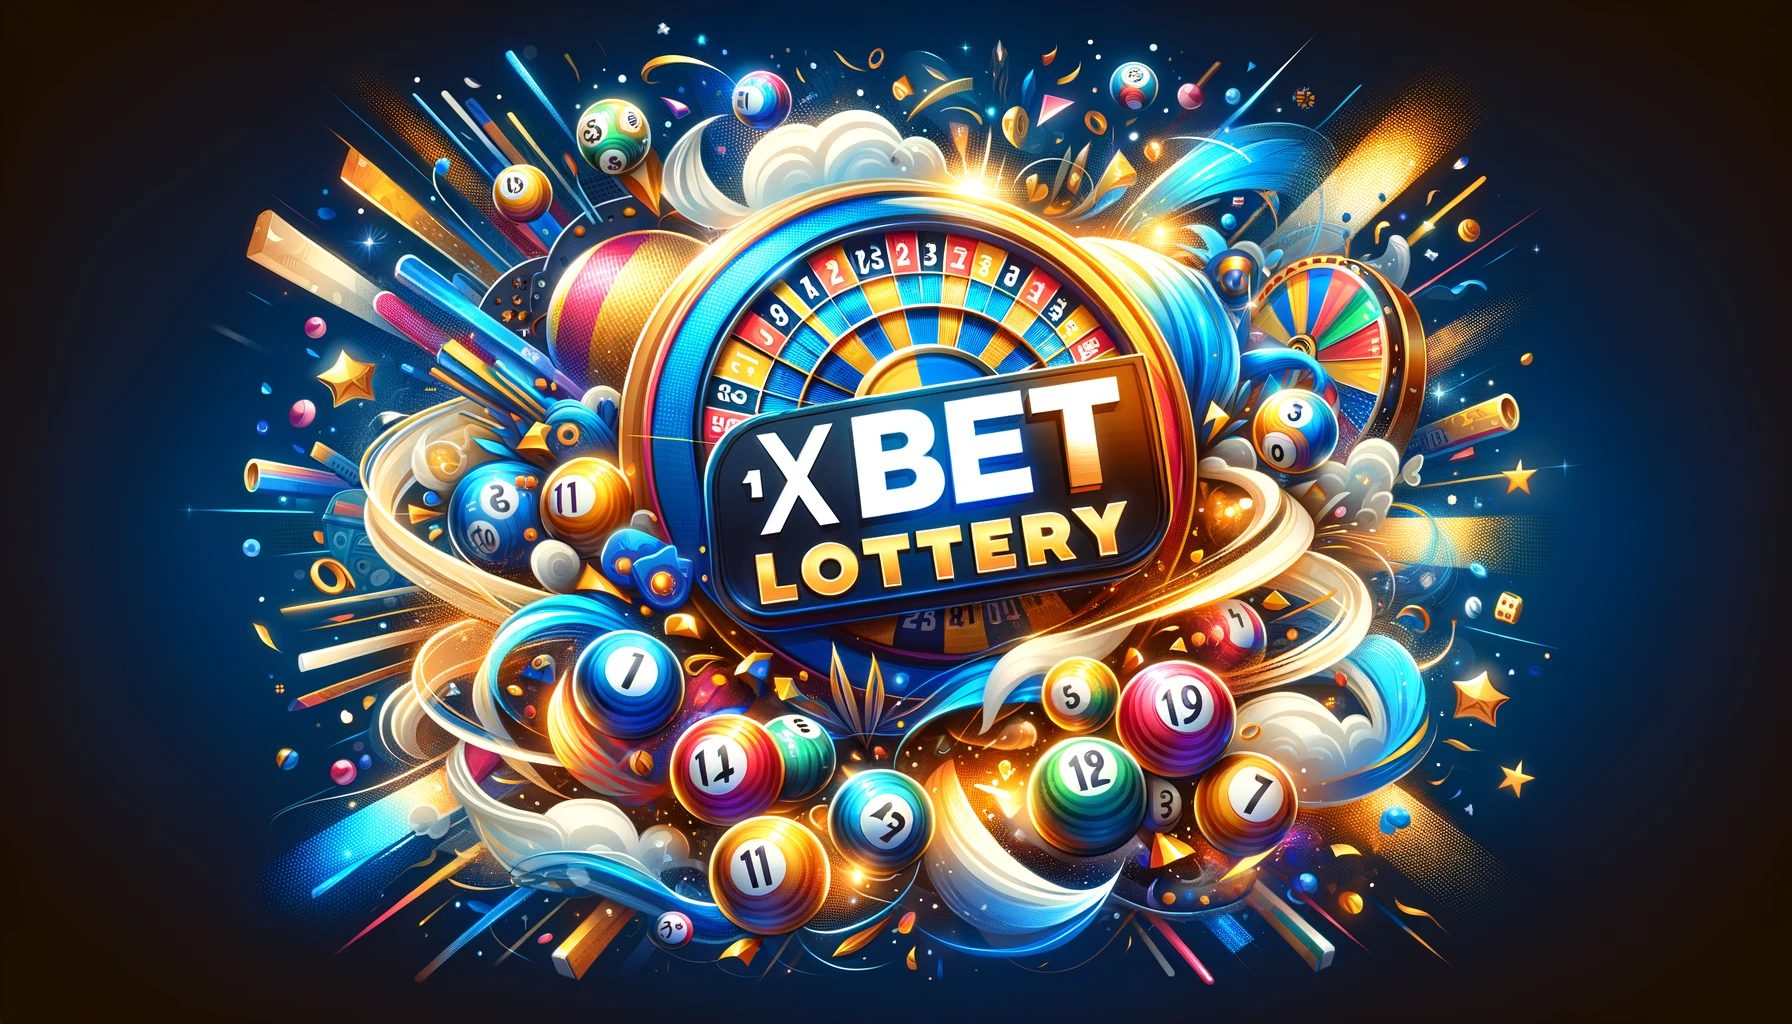 1xBet Lottery